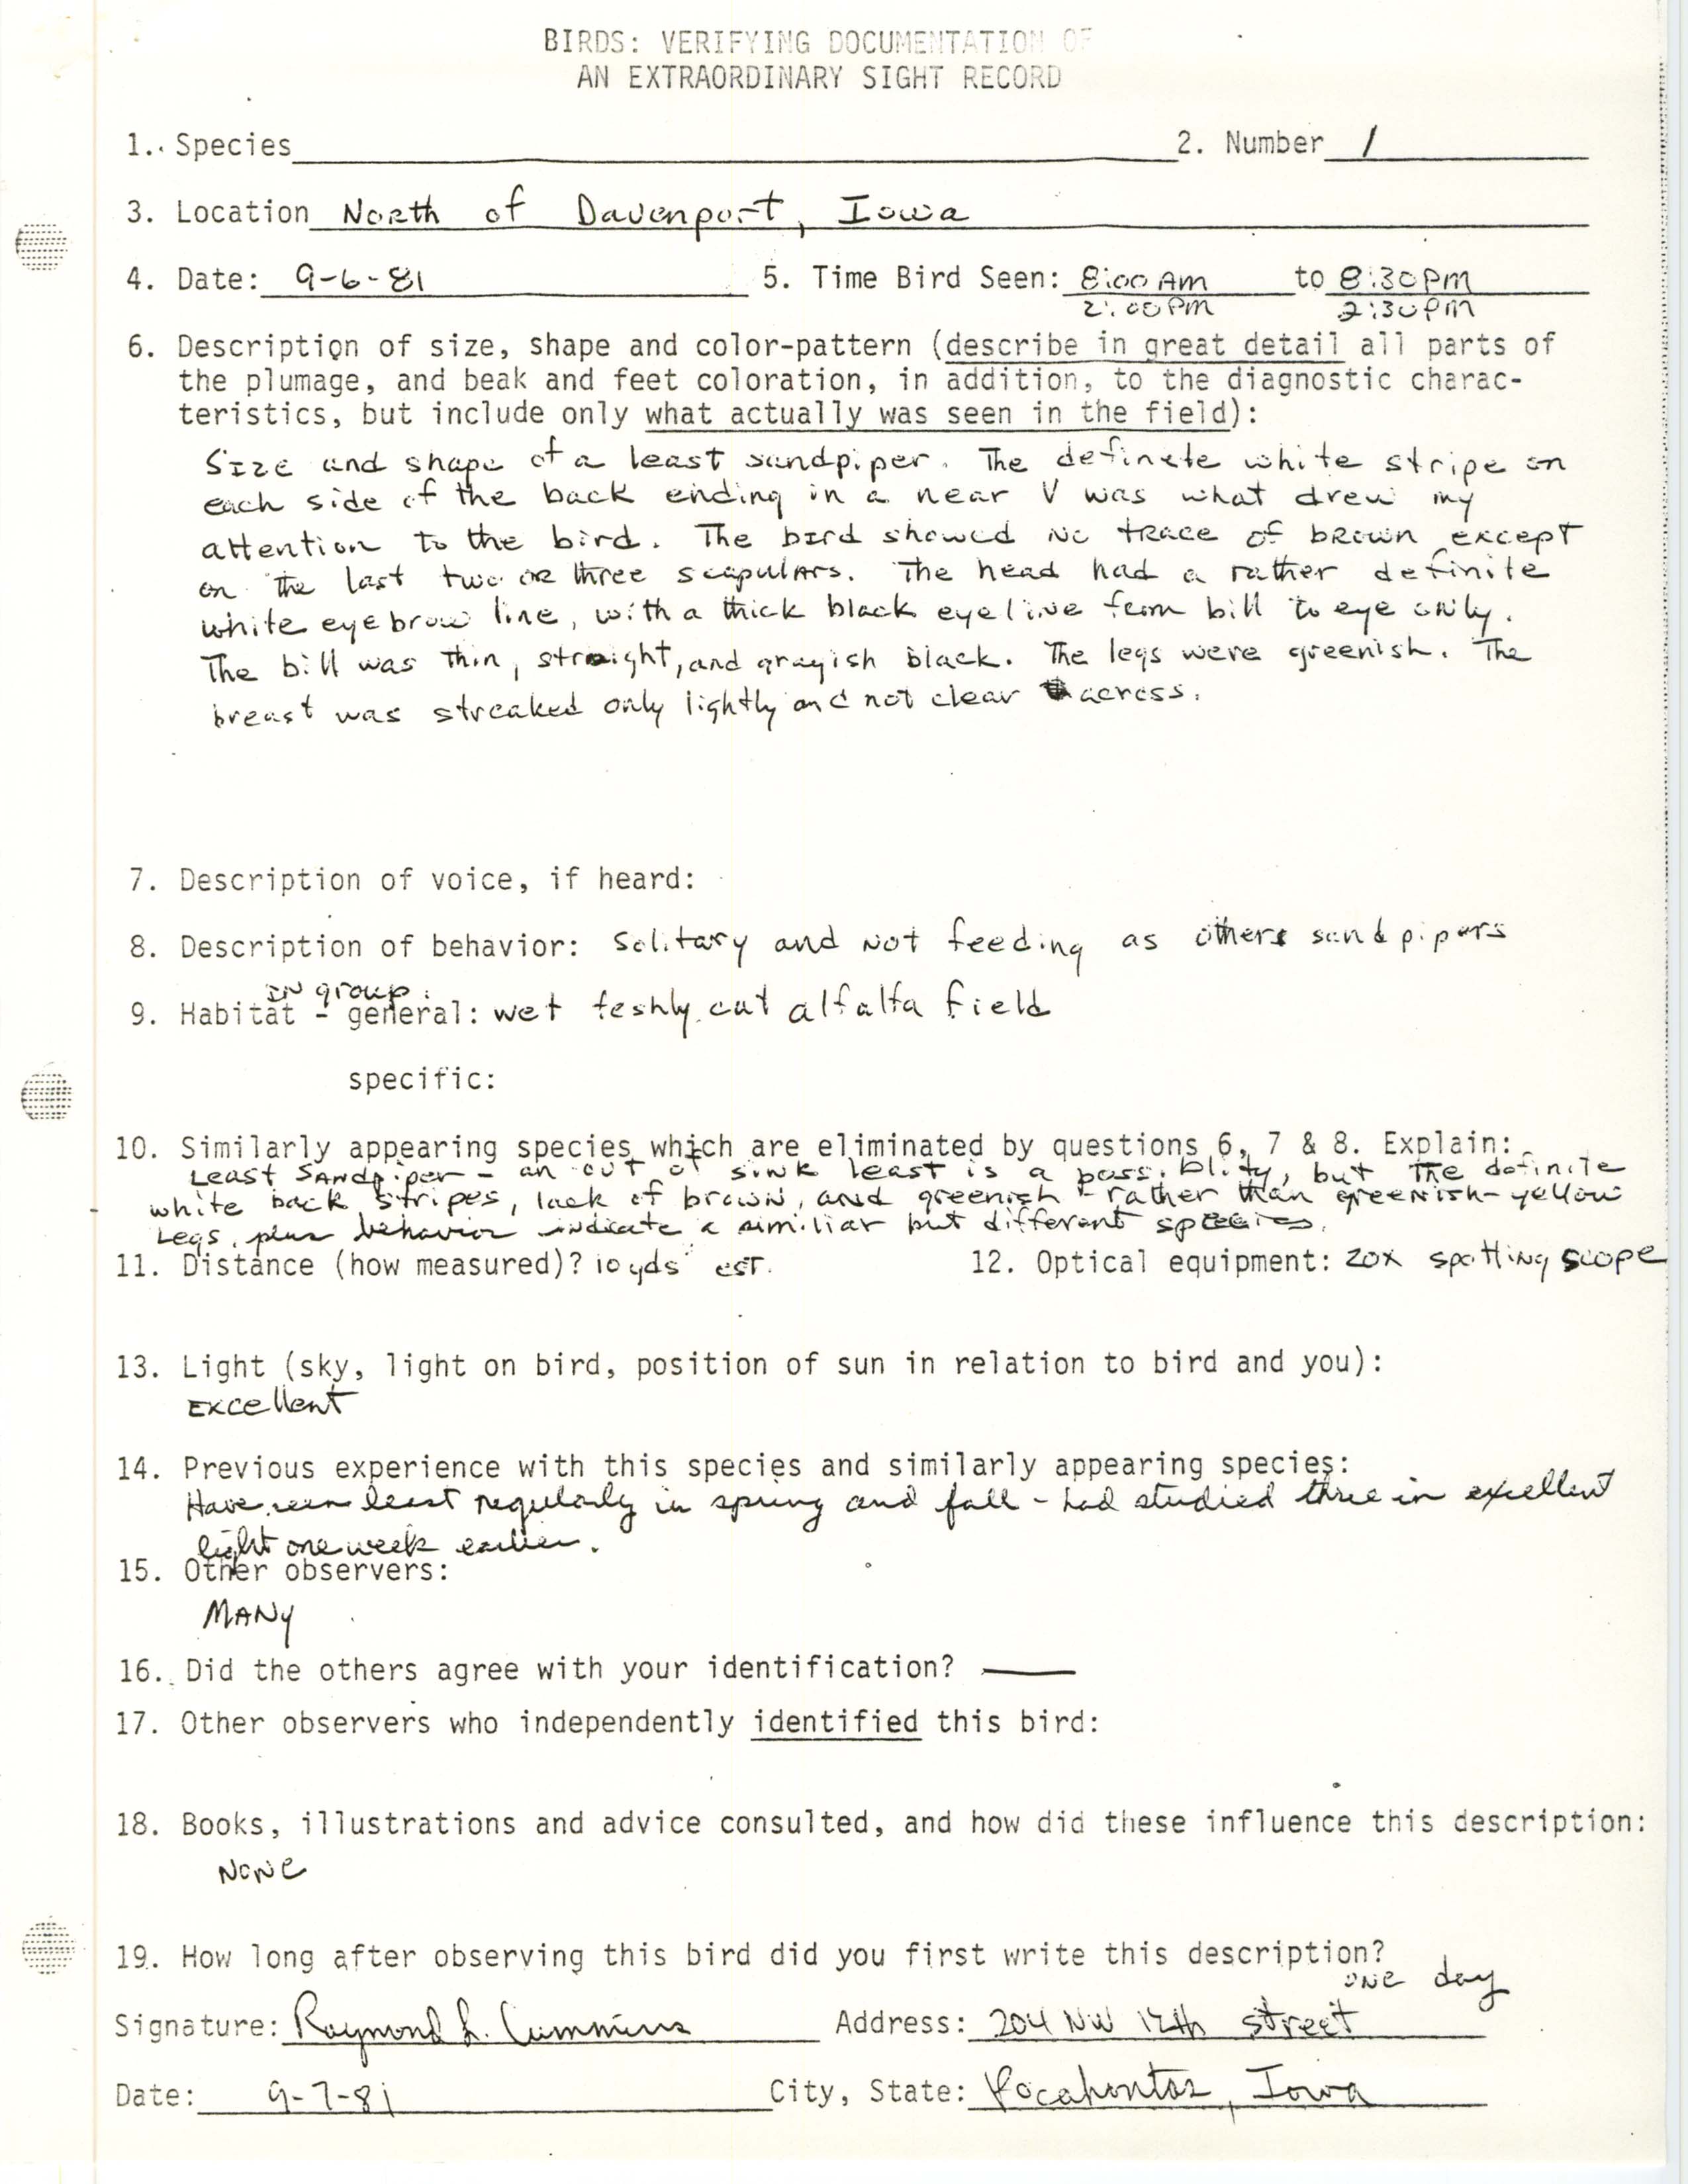 Rare bird documentation form for Long-toed Stint north of Davenport in 1981